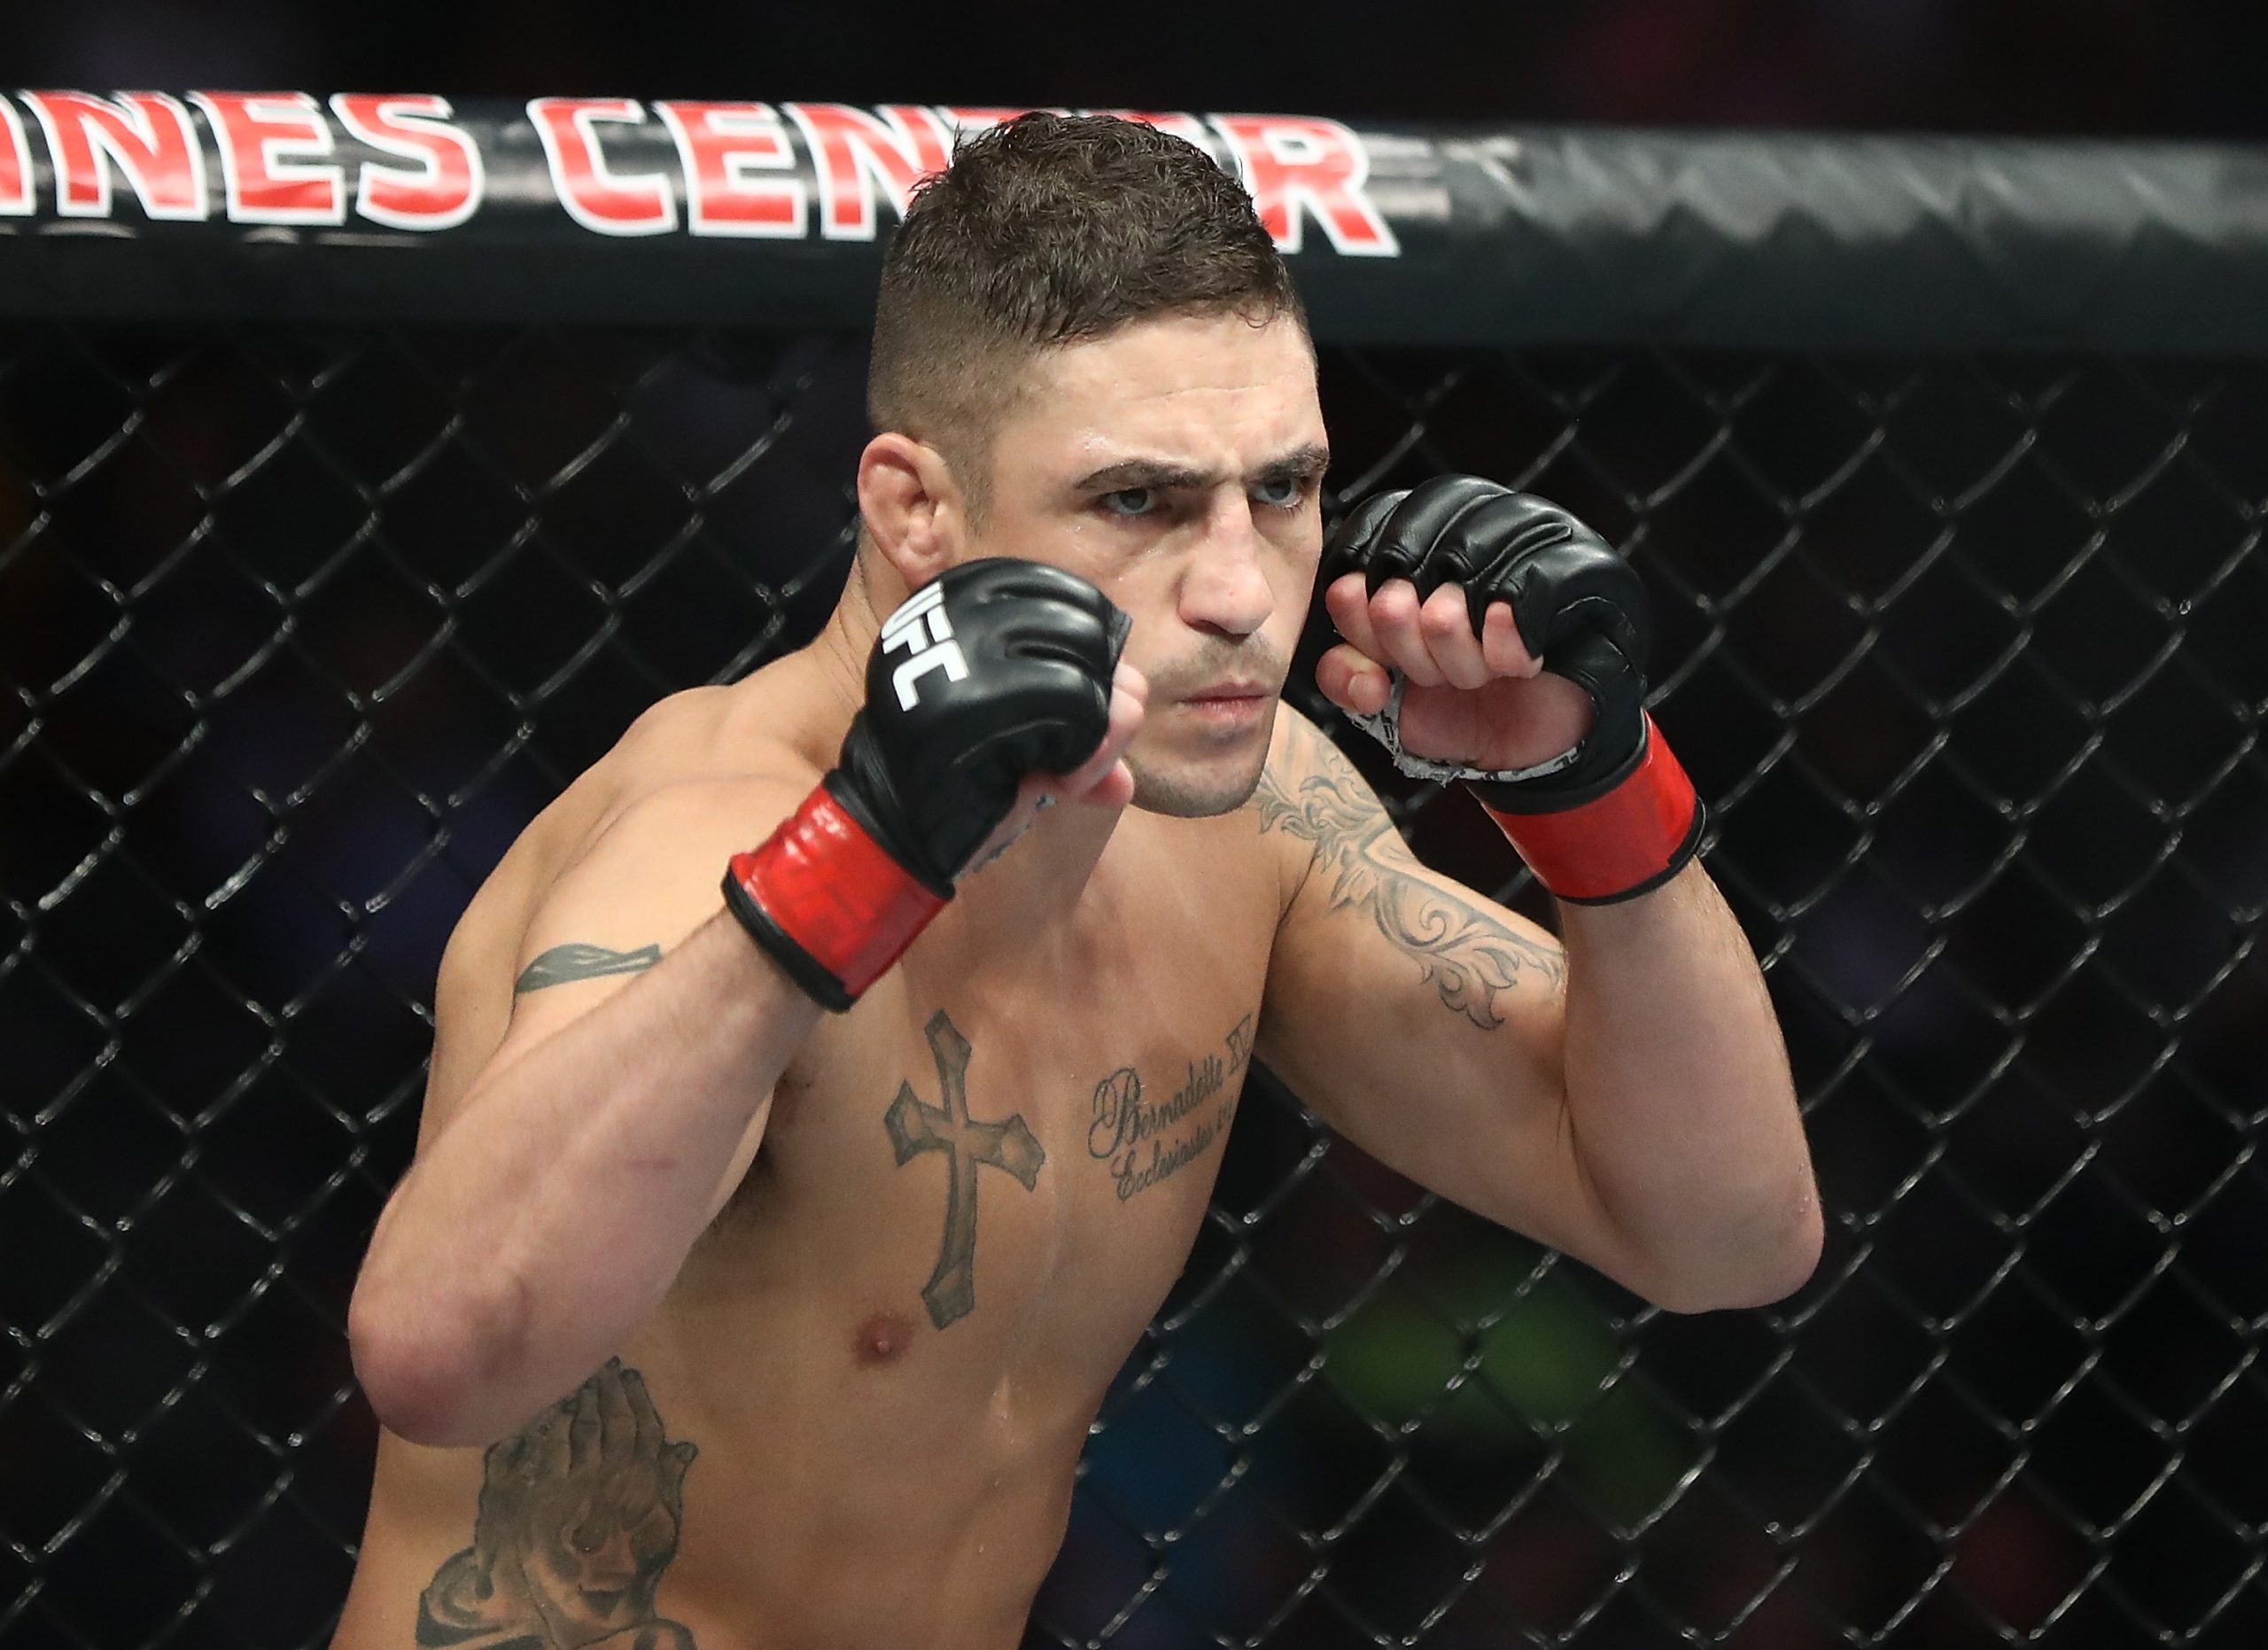 Diego Sanchez is one of the most experienced MMA stars in the UFC